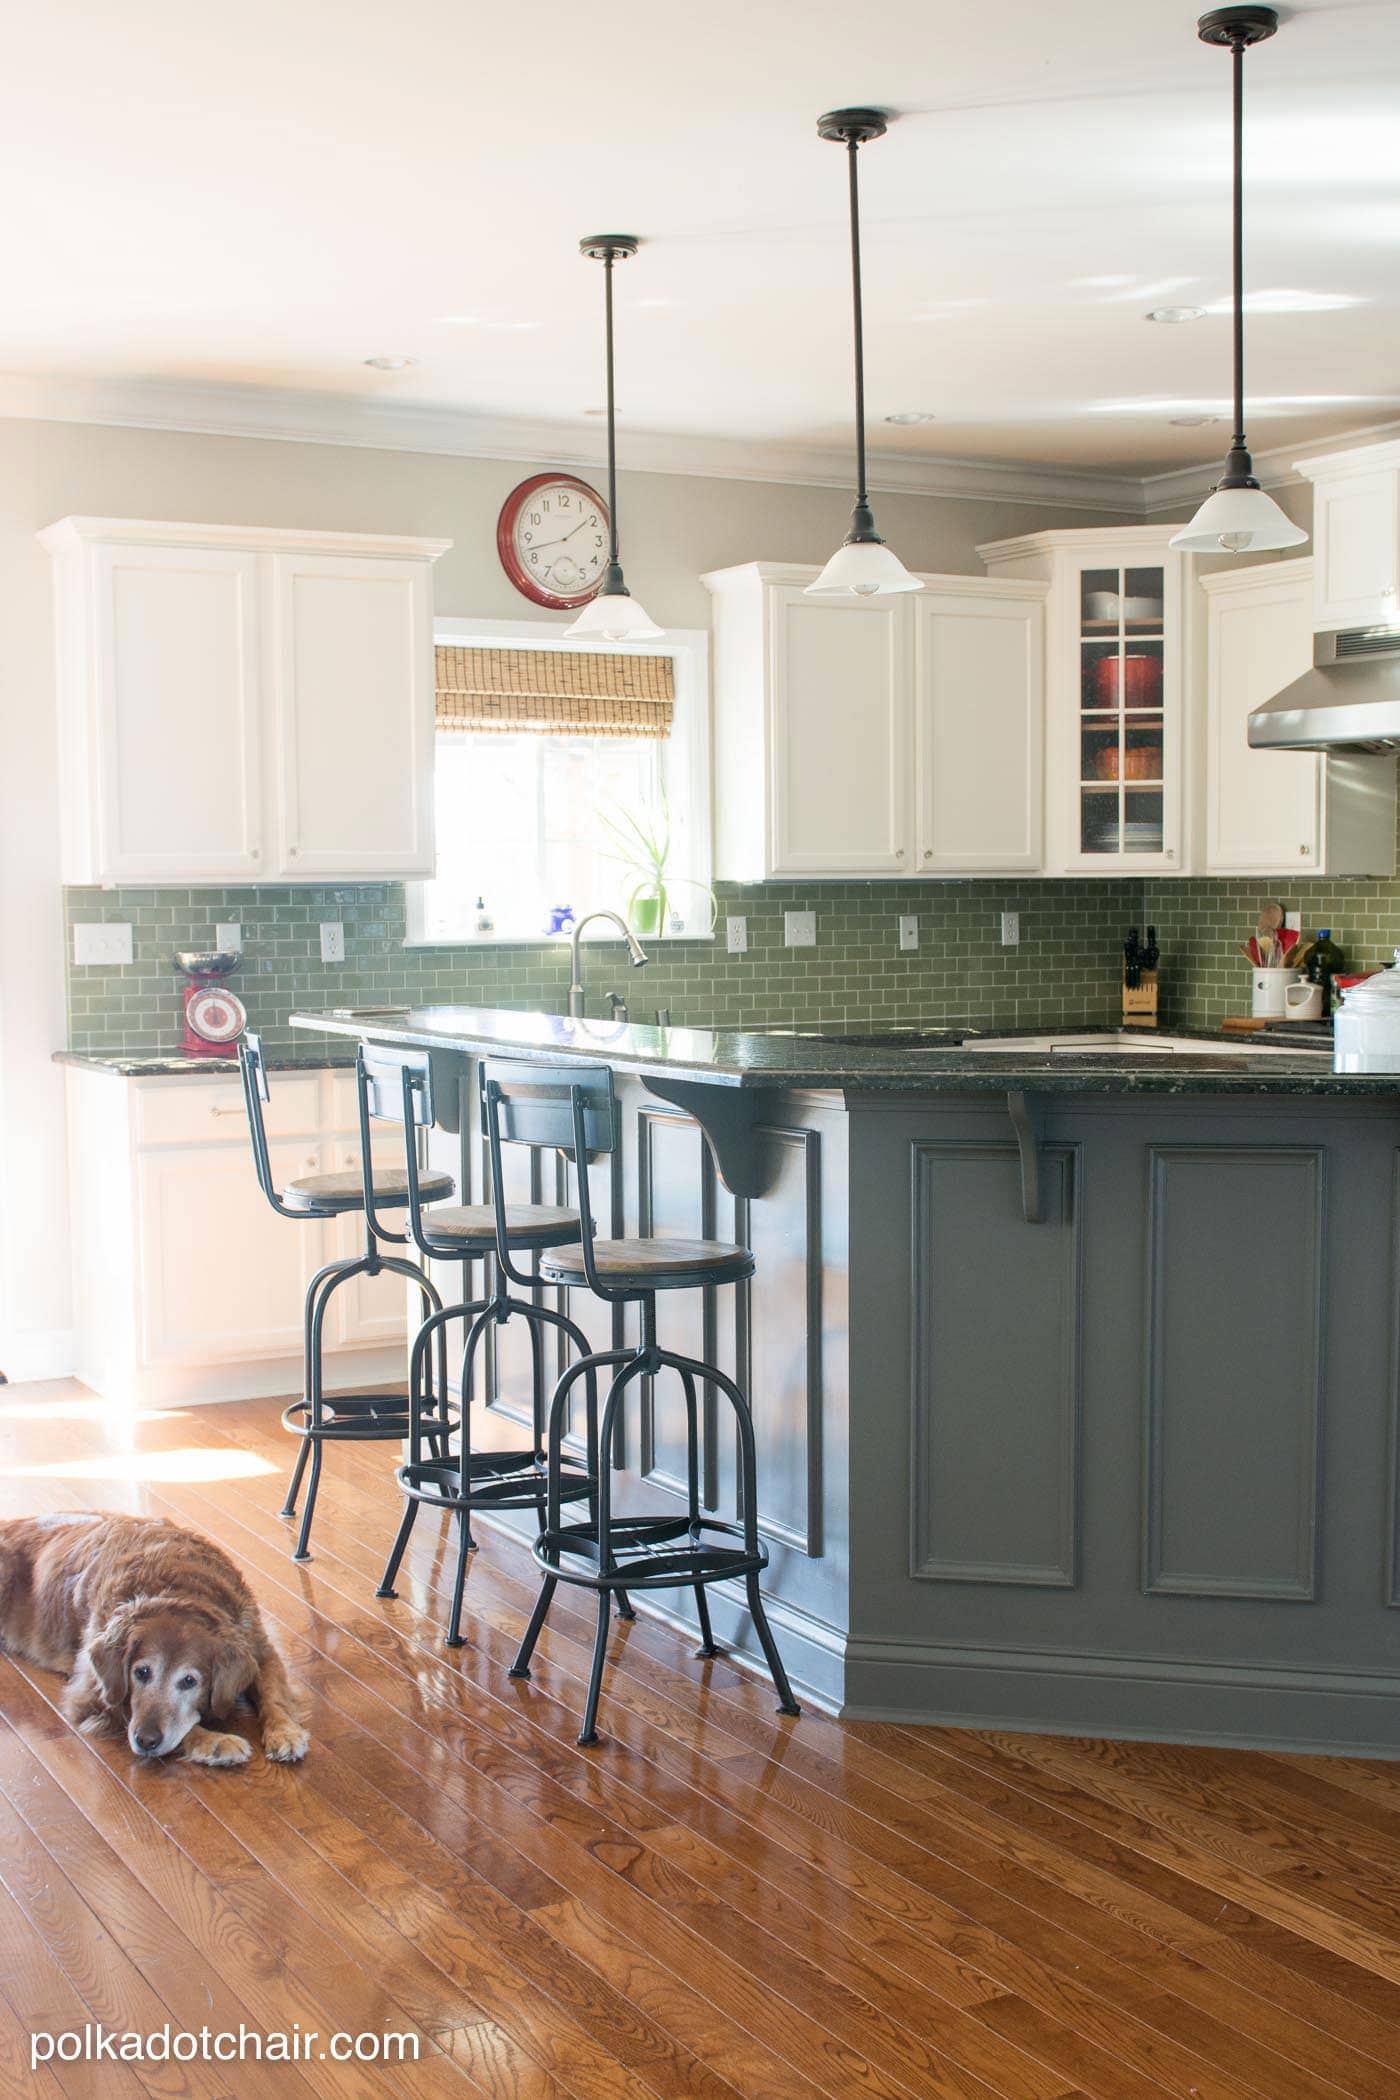 New Painted Kitchen Cabinets Ideas - The Swampthang